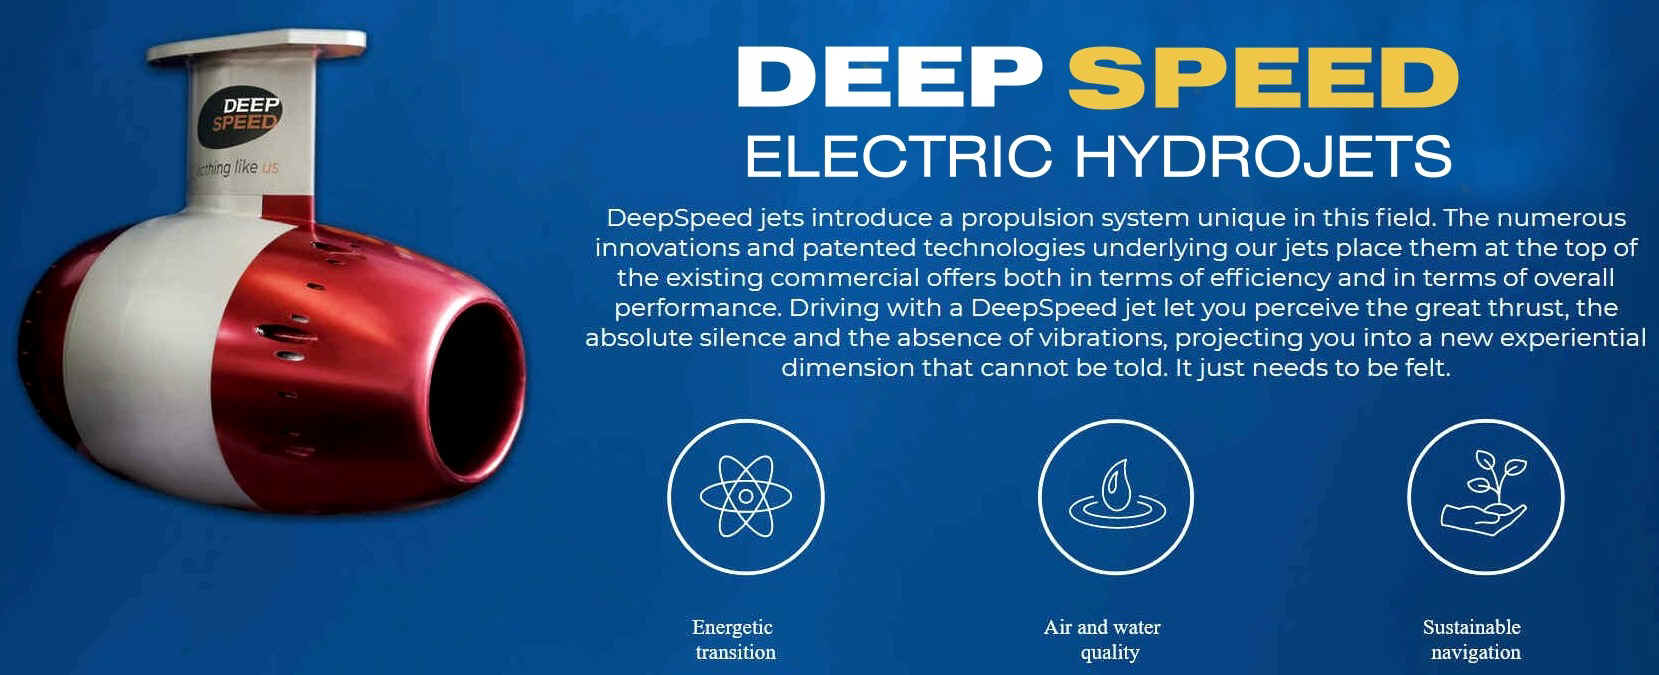 Extremely efficient electric hydrojets, motors and propellers combined.